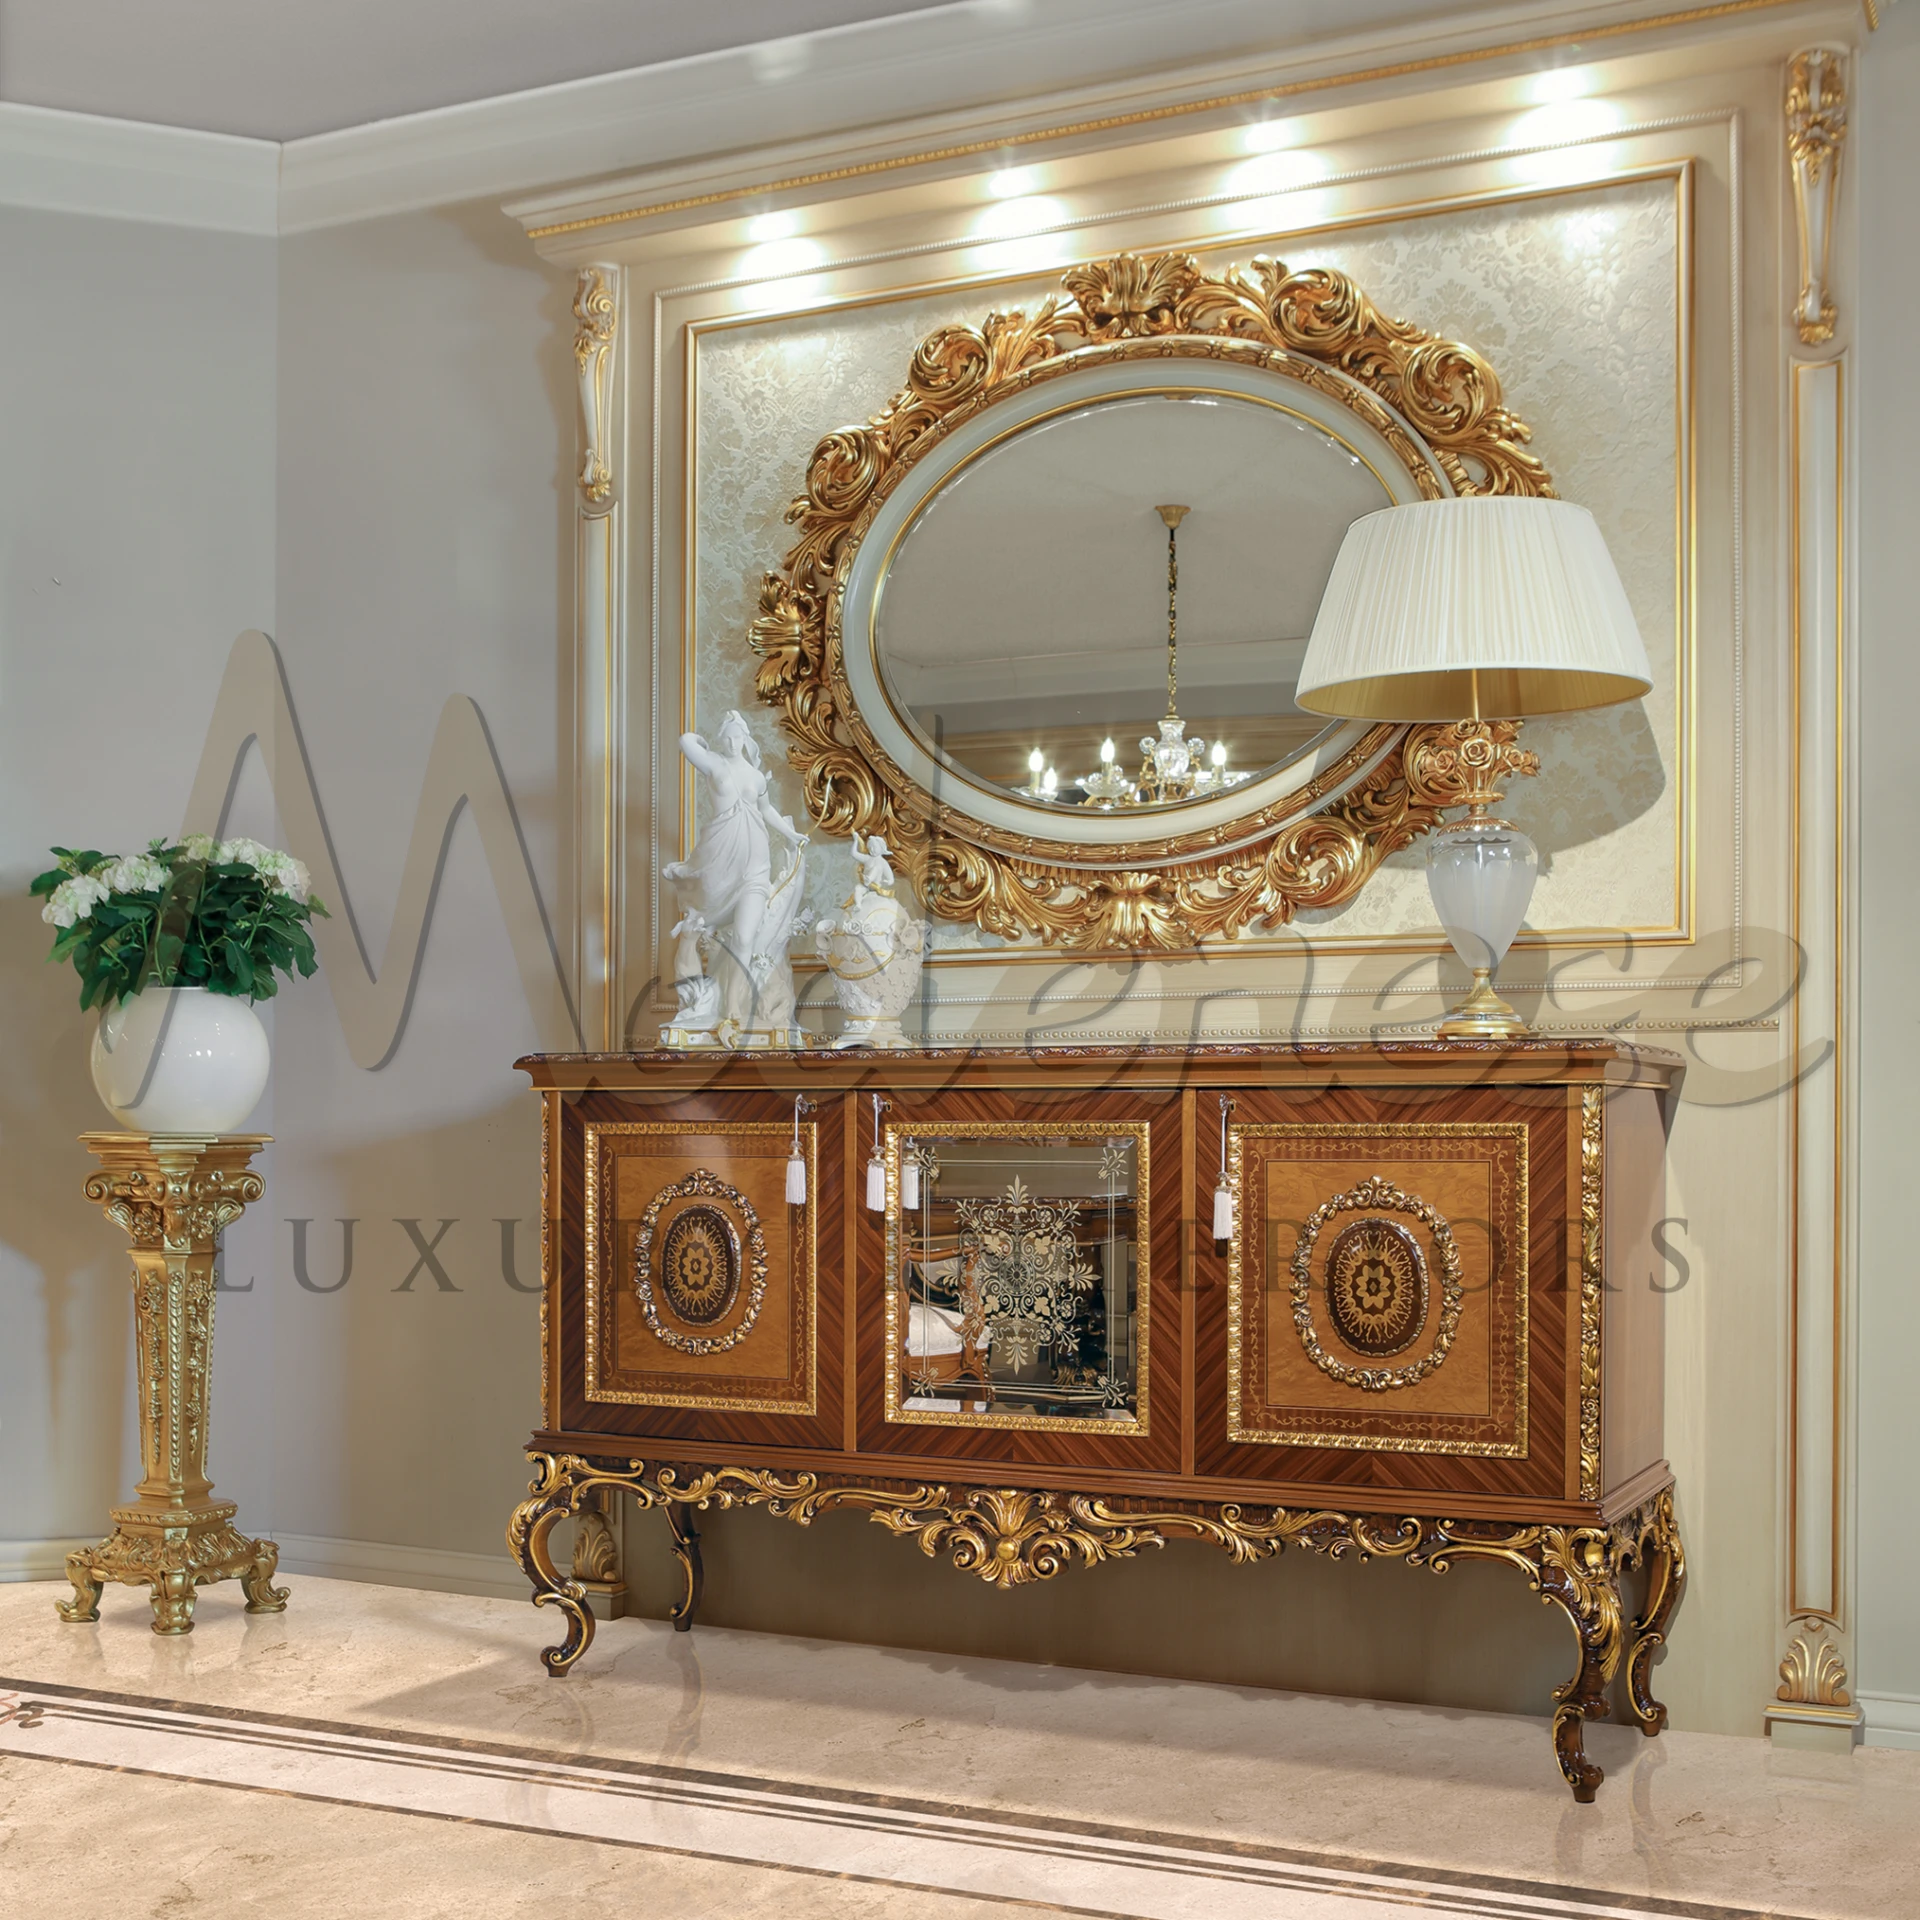 Experience the luxury of bespoke artistry with the Hand Carved Classic Mirror, featuring unique motifs and classic style.